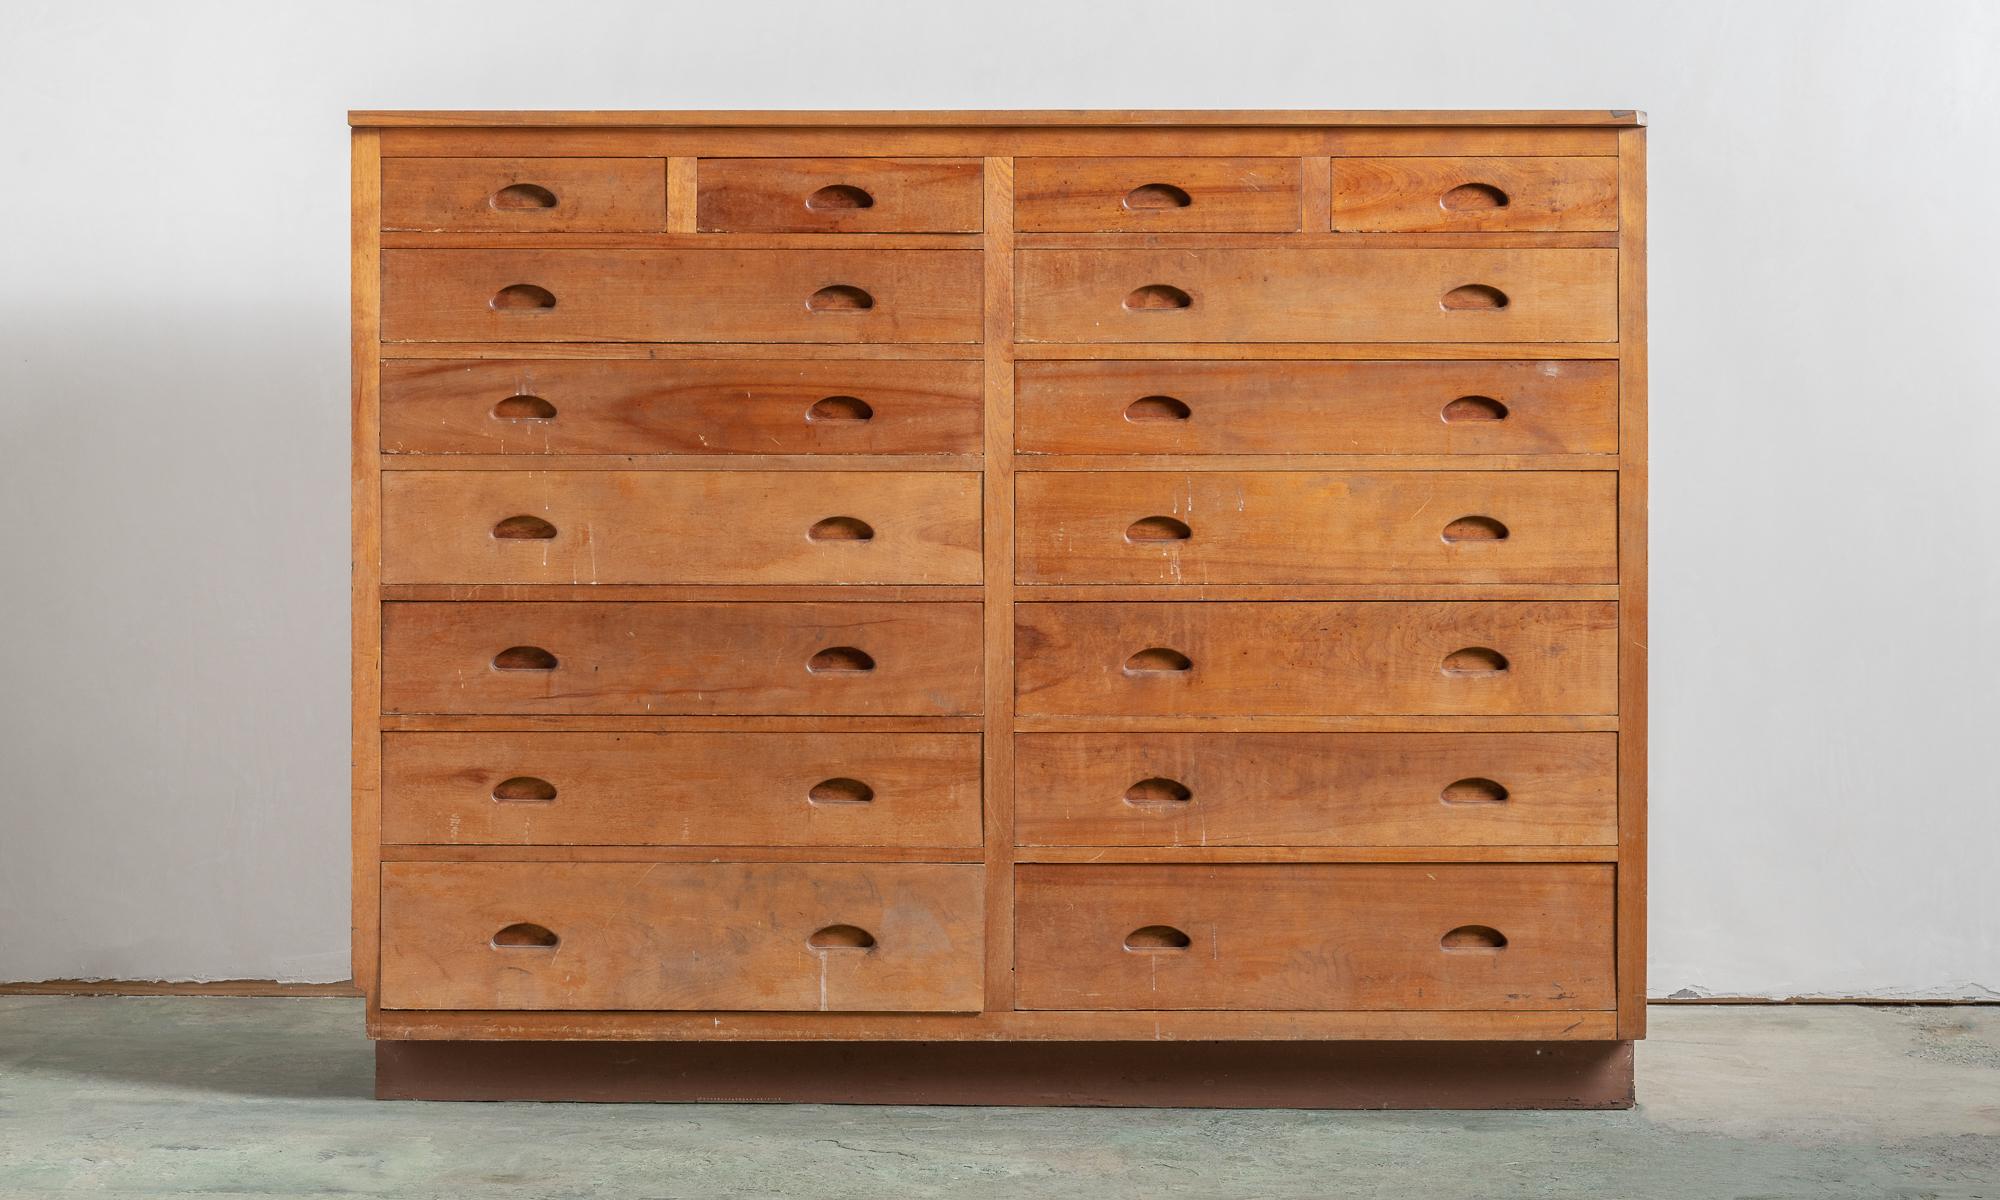 Woodworkers bank of drawers, America 20th century.

Handsome simple form includes inset pulls and wonderful patina. Originally from Bristol, Rhode Island.